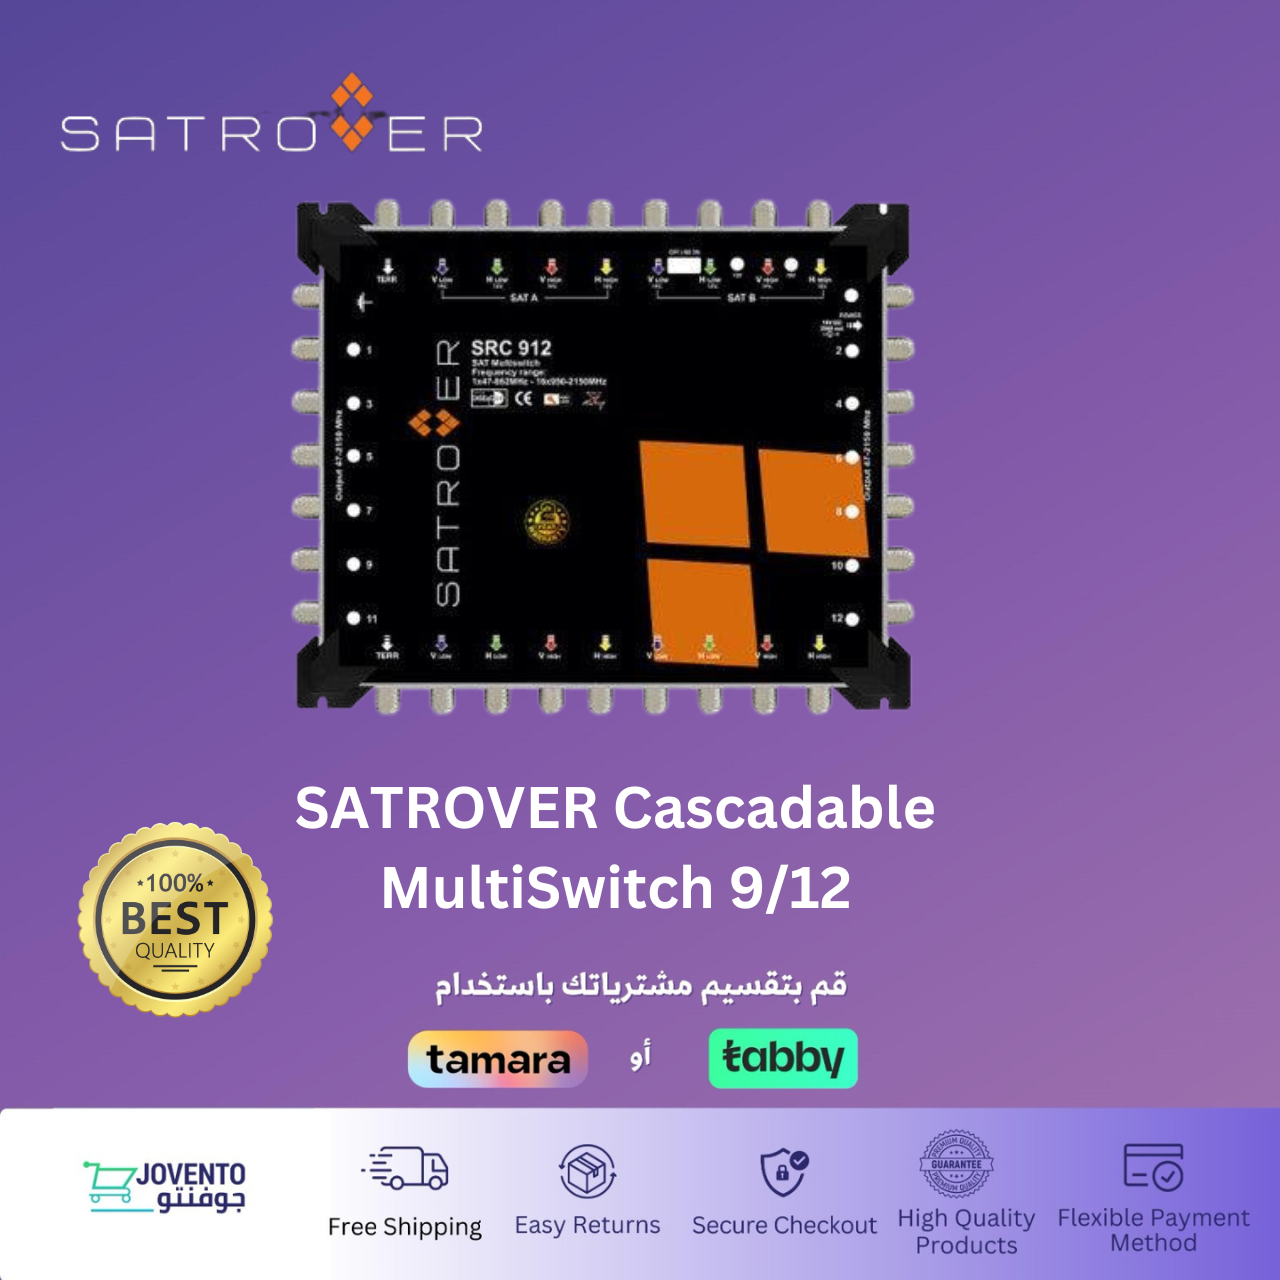 SATROVER Cascadable MultiSwitch 9/12